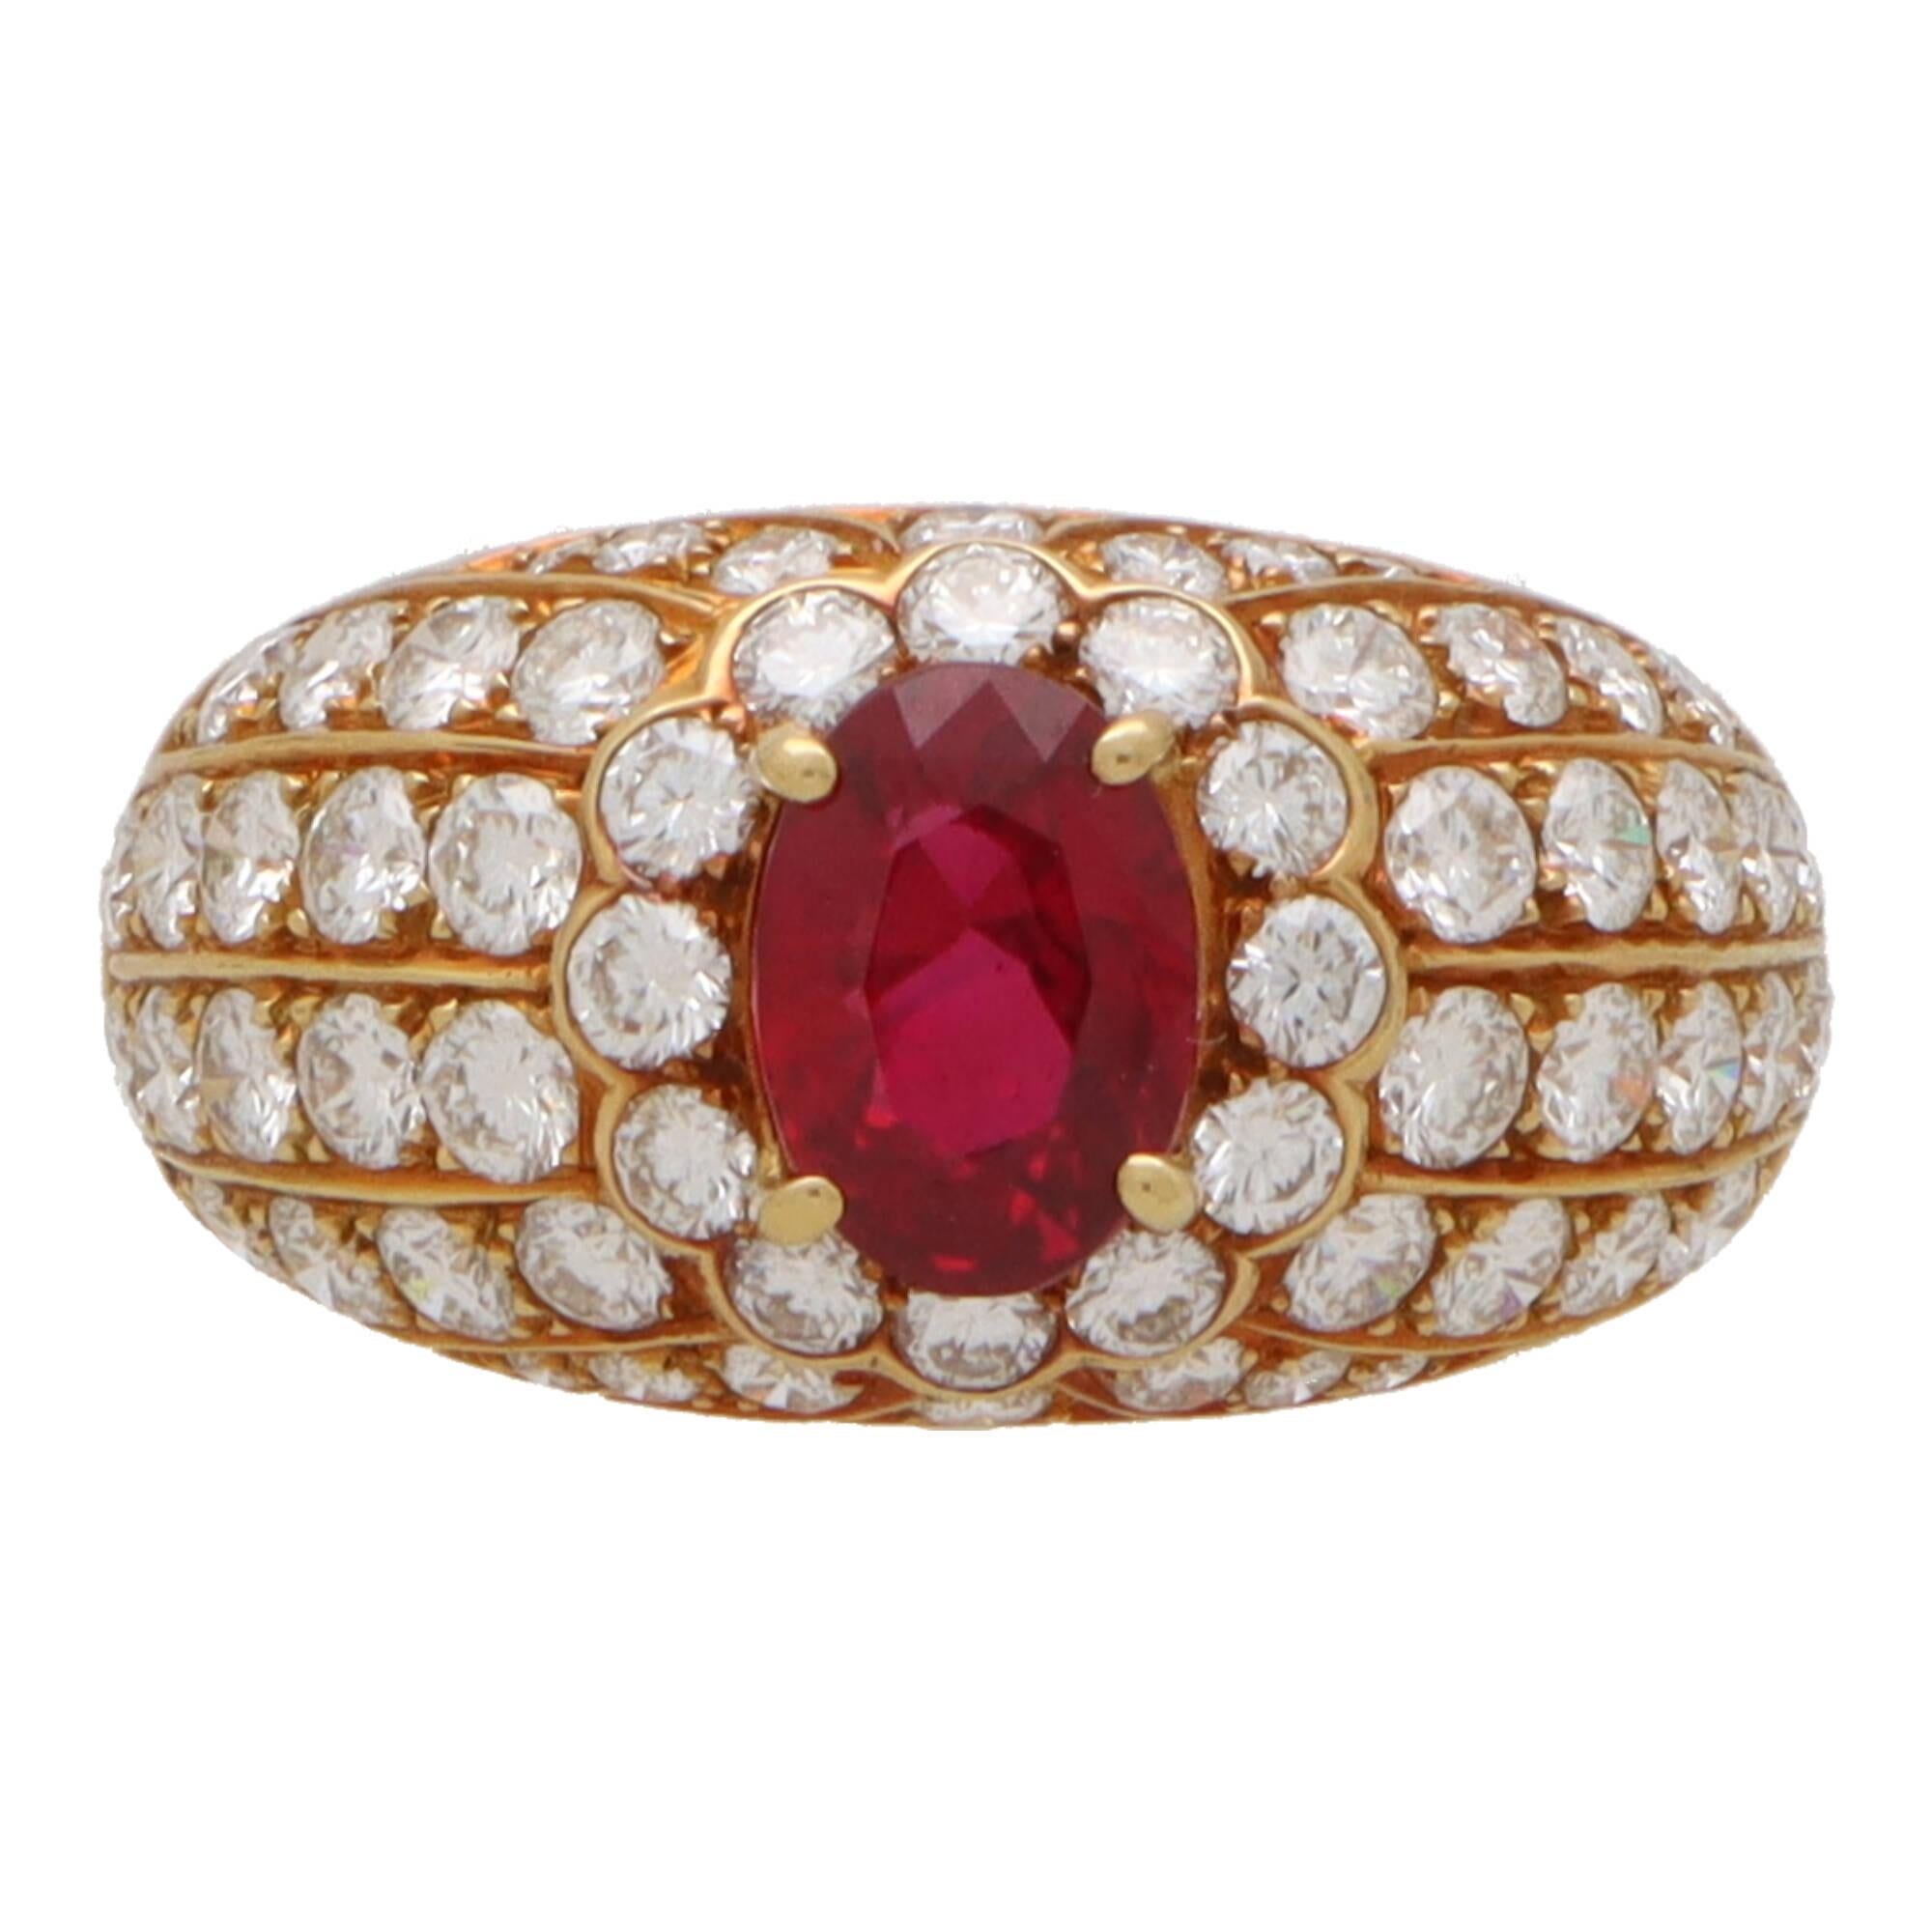  A beautiful vintage ruby and diamond cluster bombe ring set in 18k yellow gold.

This spectacular piece is composed in a bombe design and is centrally set with a vibrant oval cut ruby. The ruby is four claw set securely and surrounded by a cluster